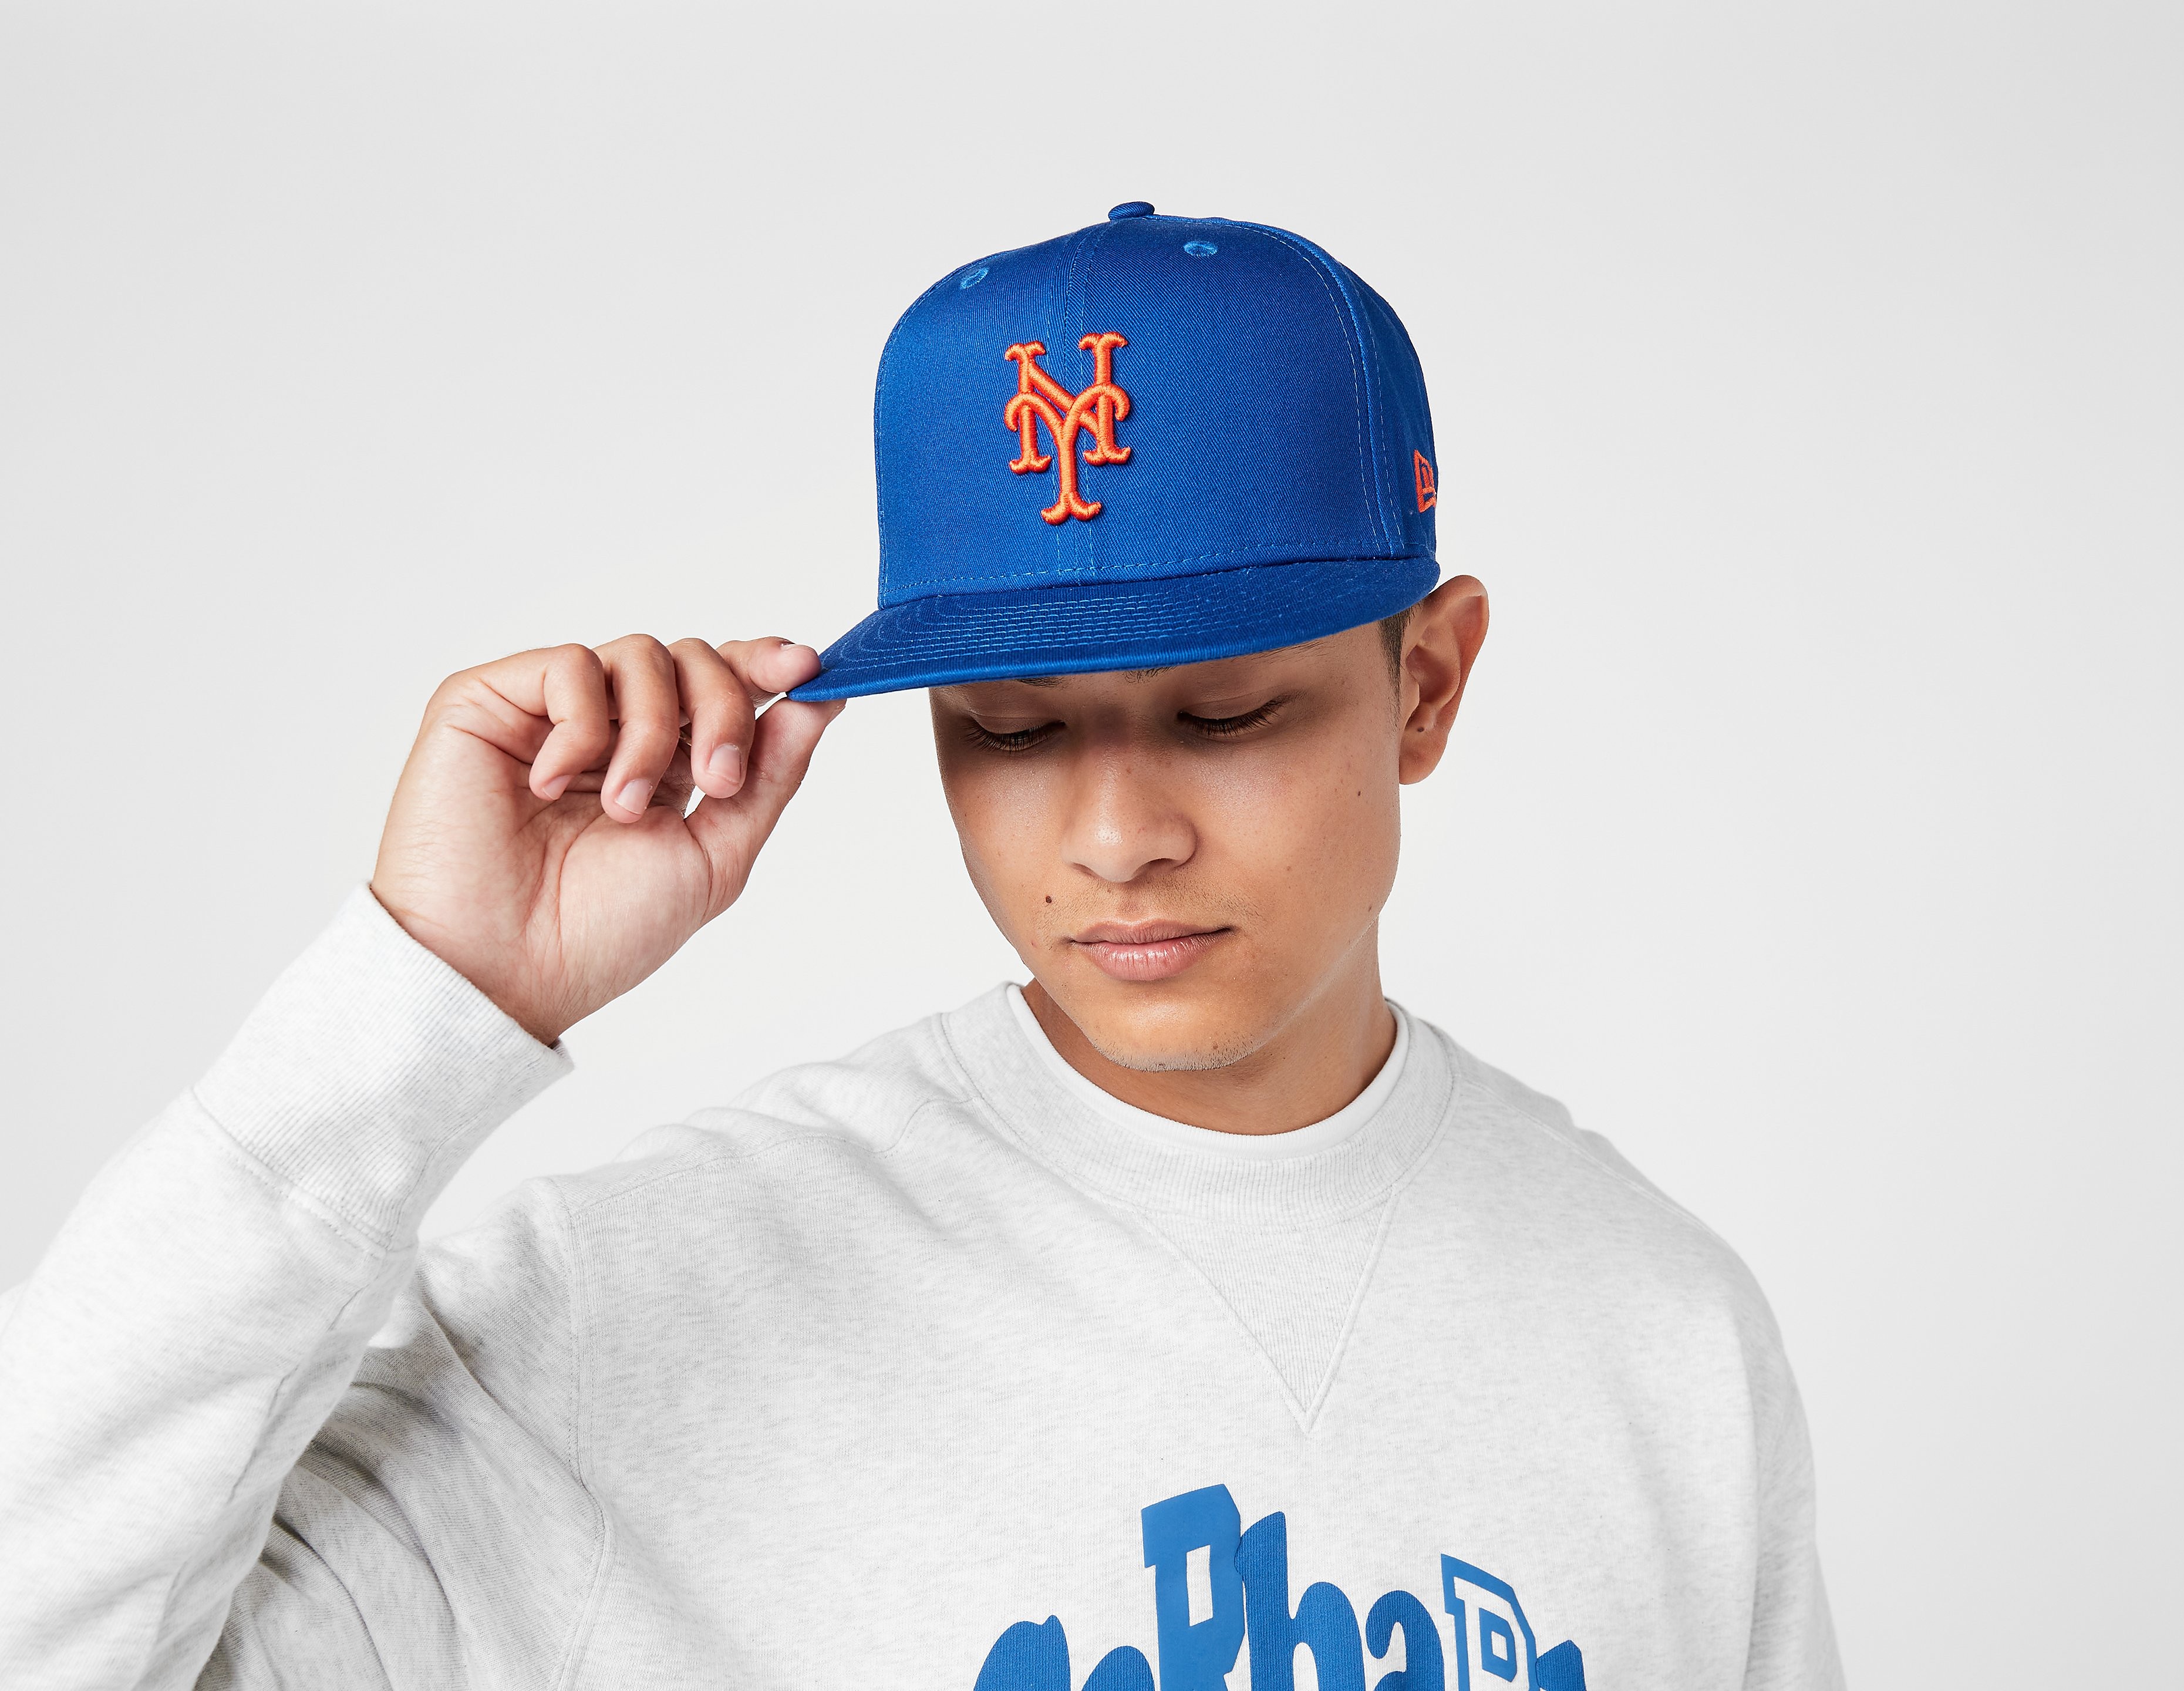 New Era MLB New York Mets Authentic On Field 9FIFTY Cap